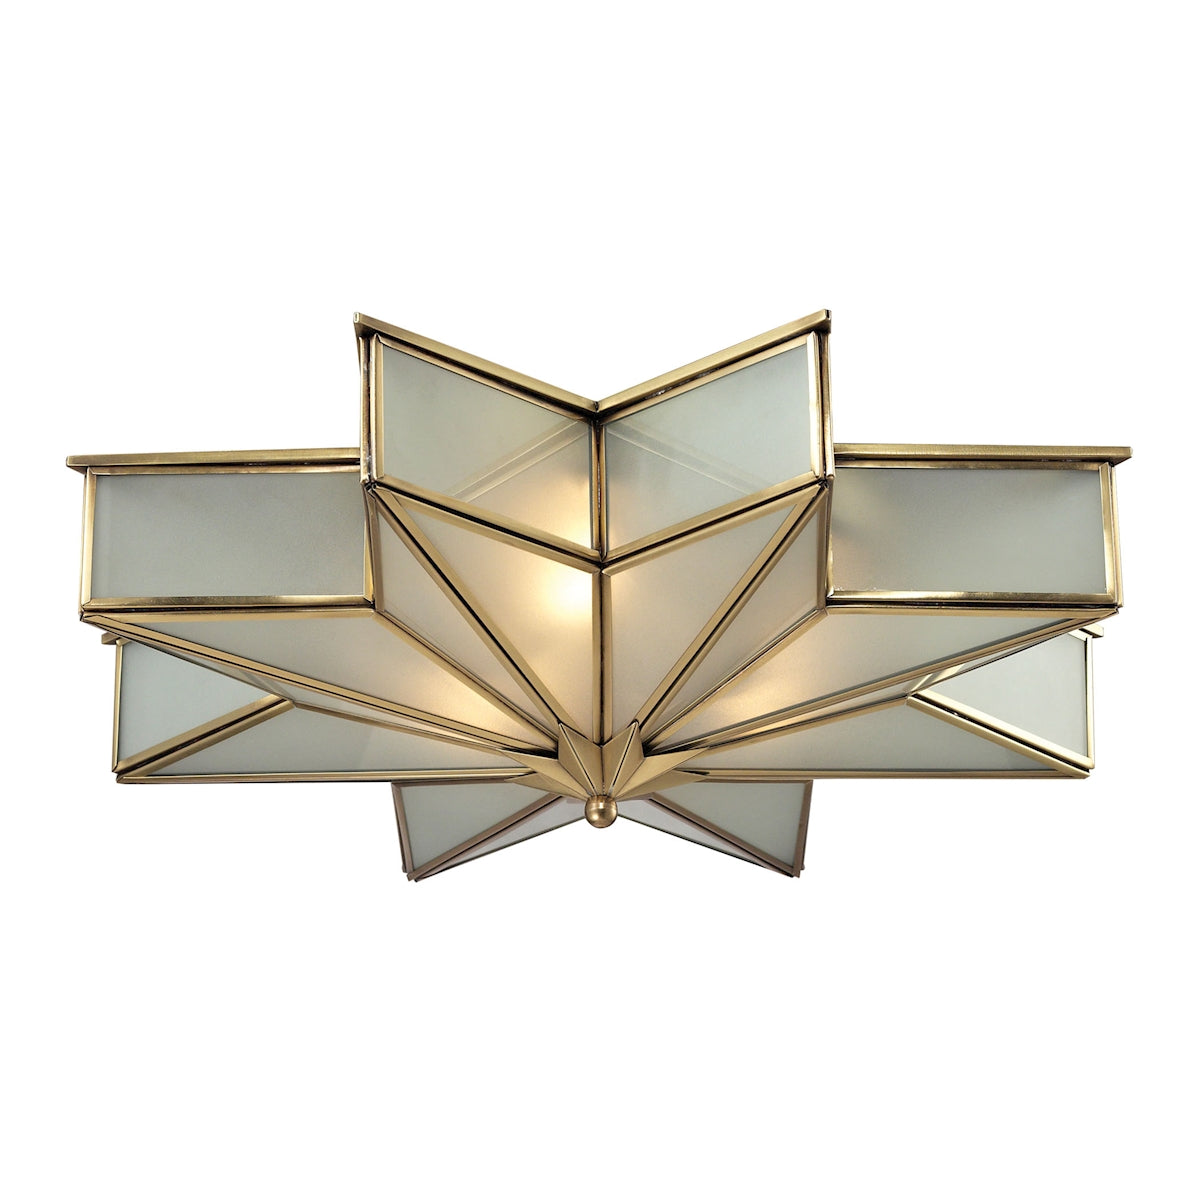 Decostar 3-Light Flush Mount in Brushed Brass with Frosted Glass Panels